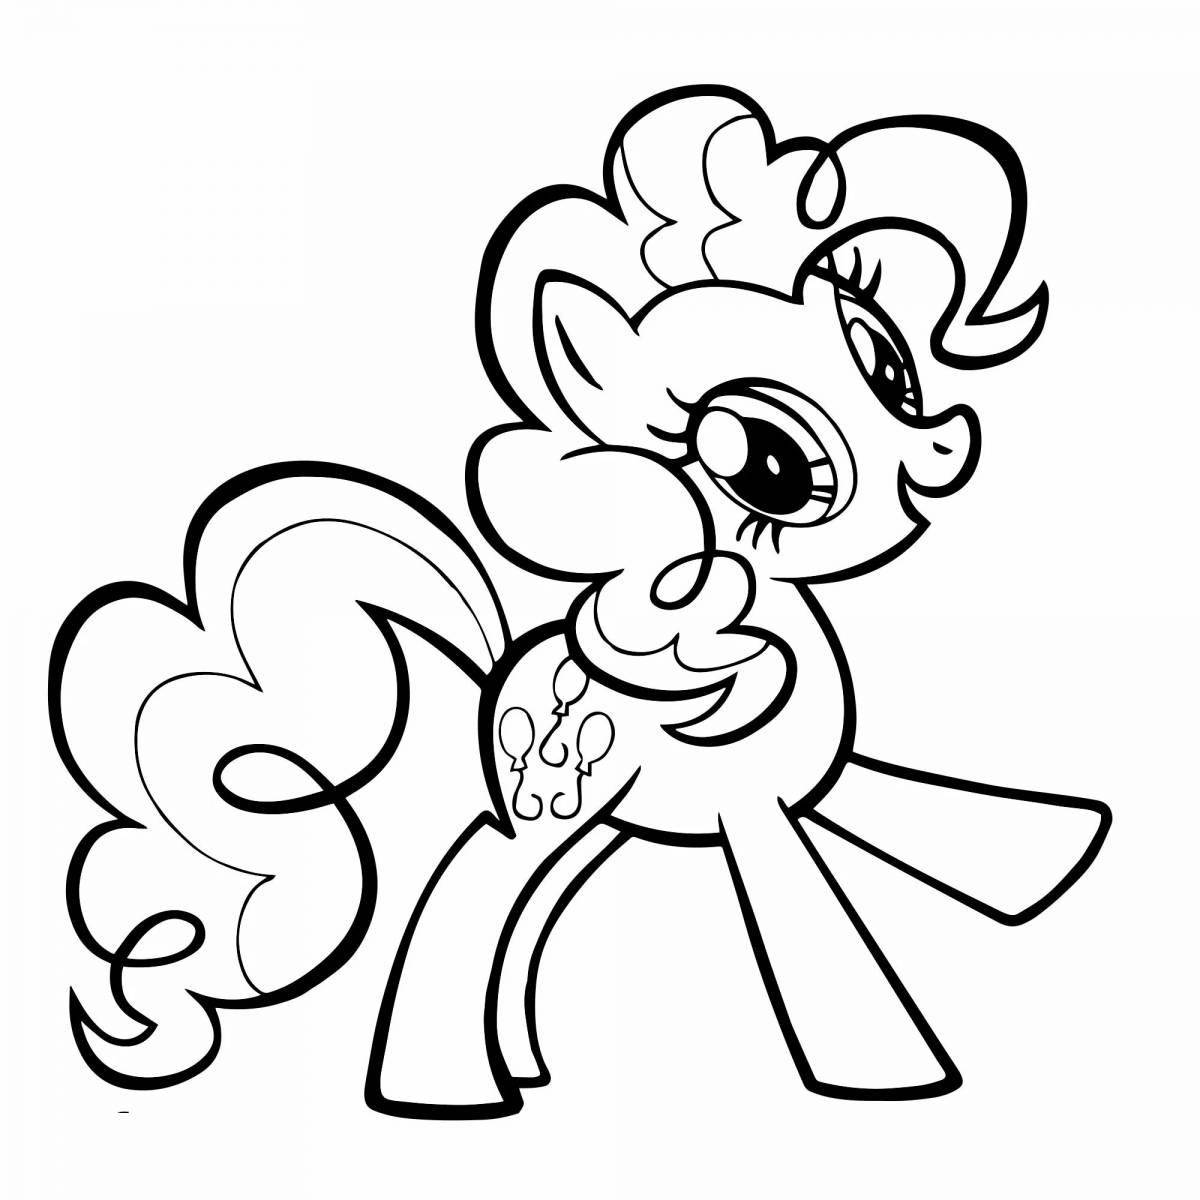 Adorable pinkie pie coloring book for girls